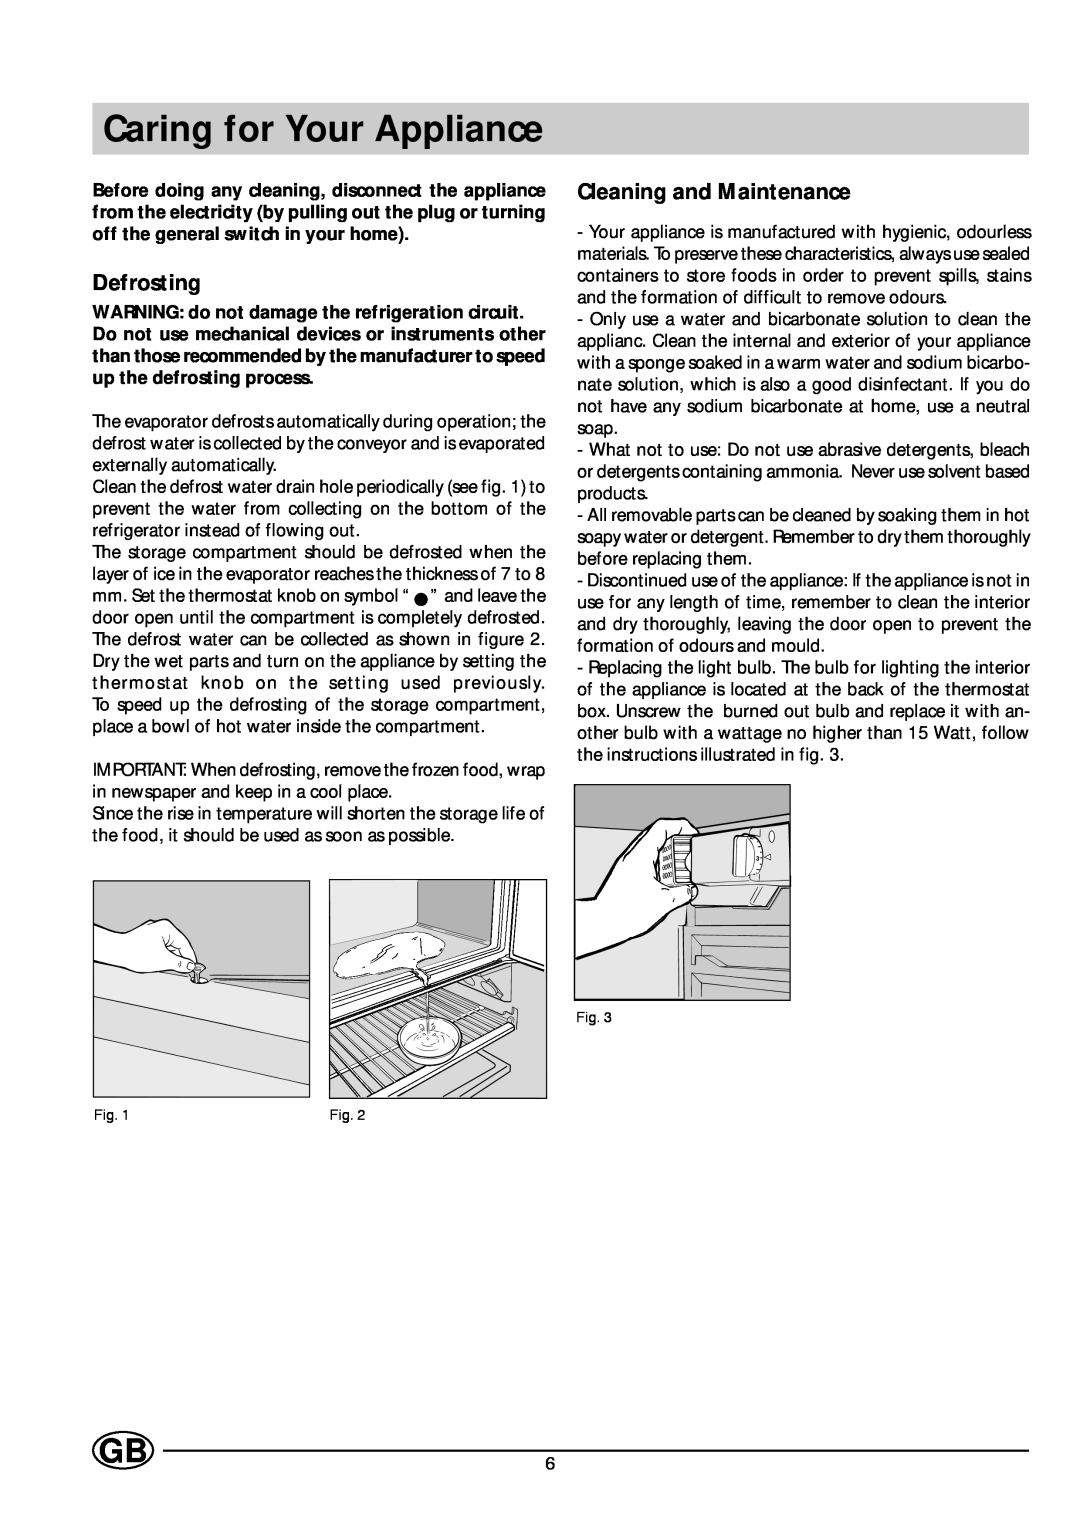 Indesit GS 164 I UK manual Caring for Your Appliance, Defrosting, Cleaning and Maintenance 